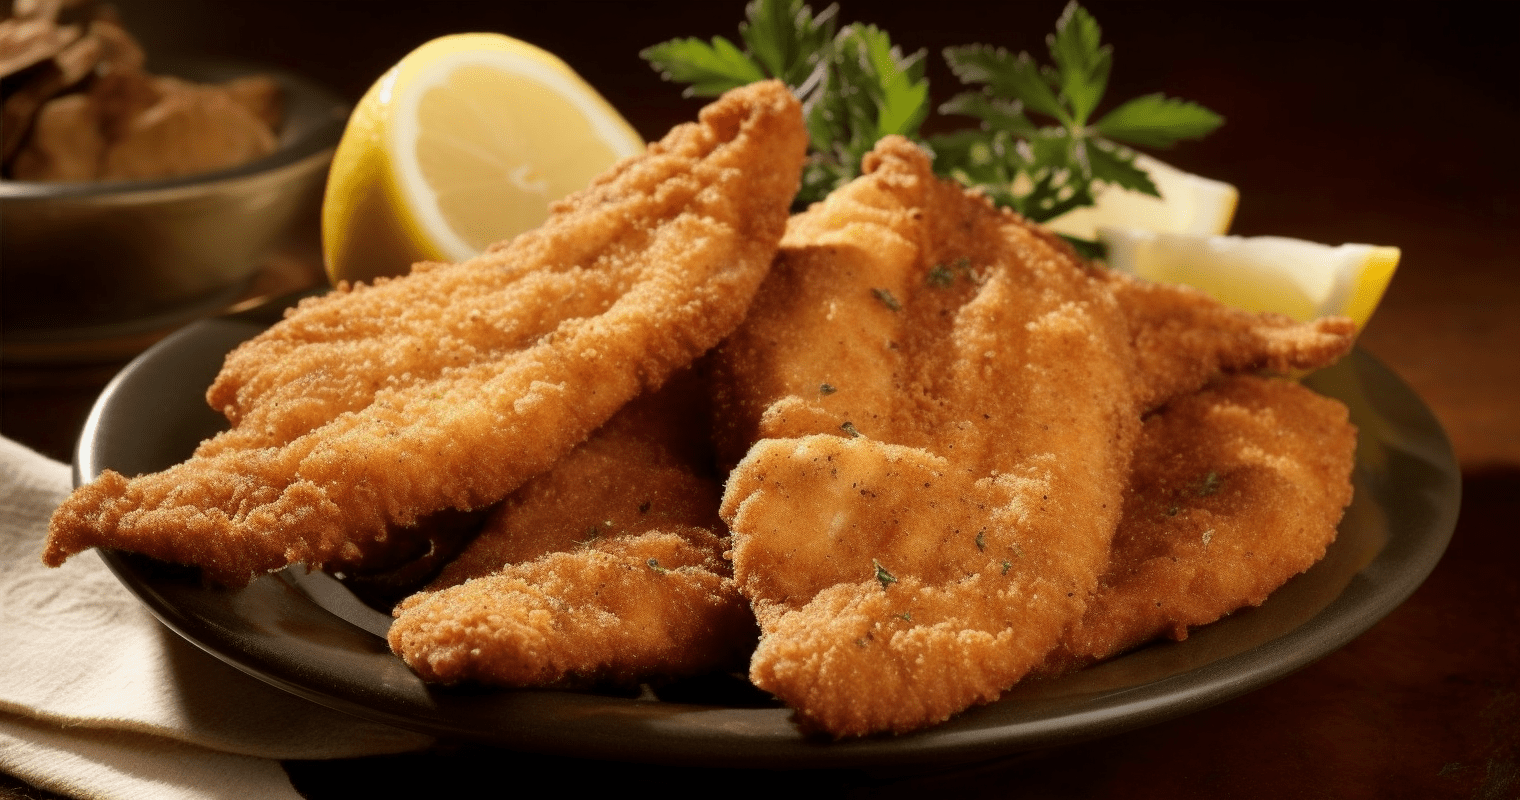 Southern Fried Catfish being served